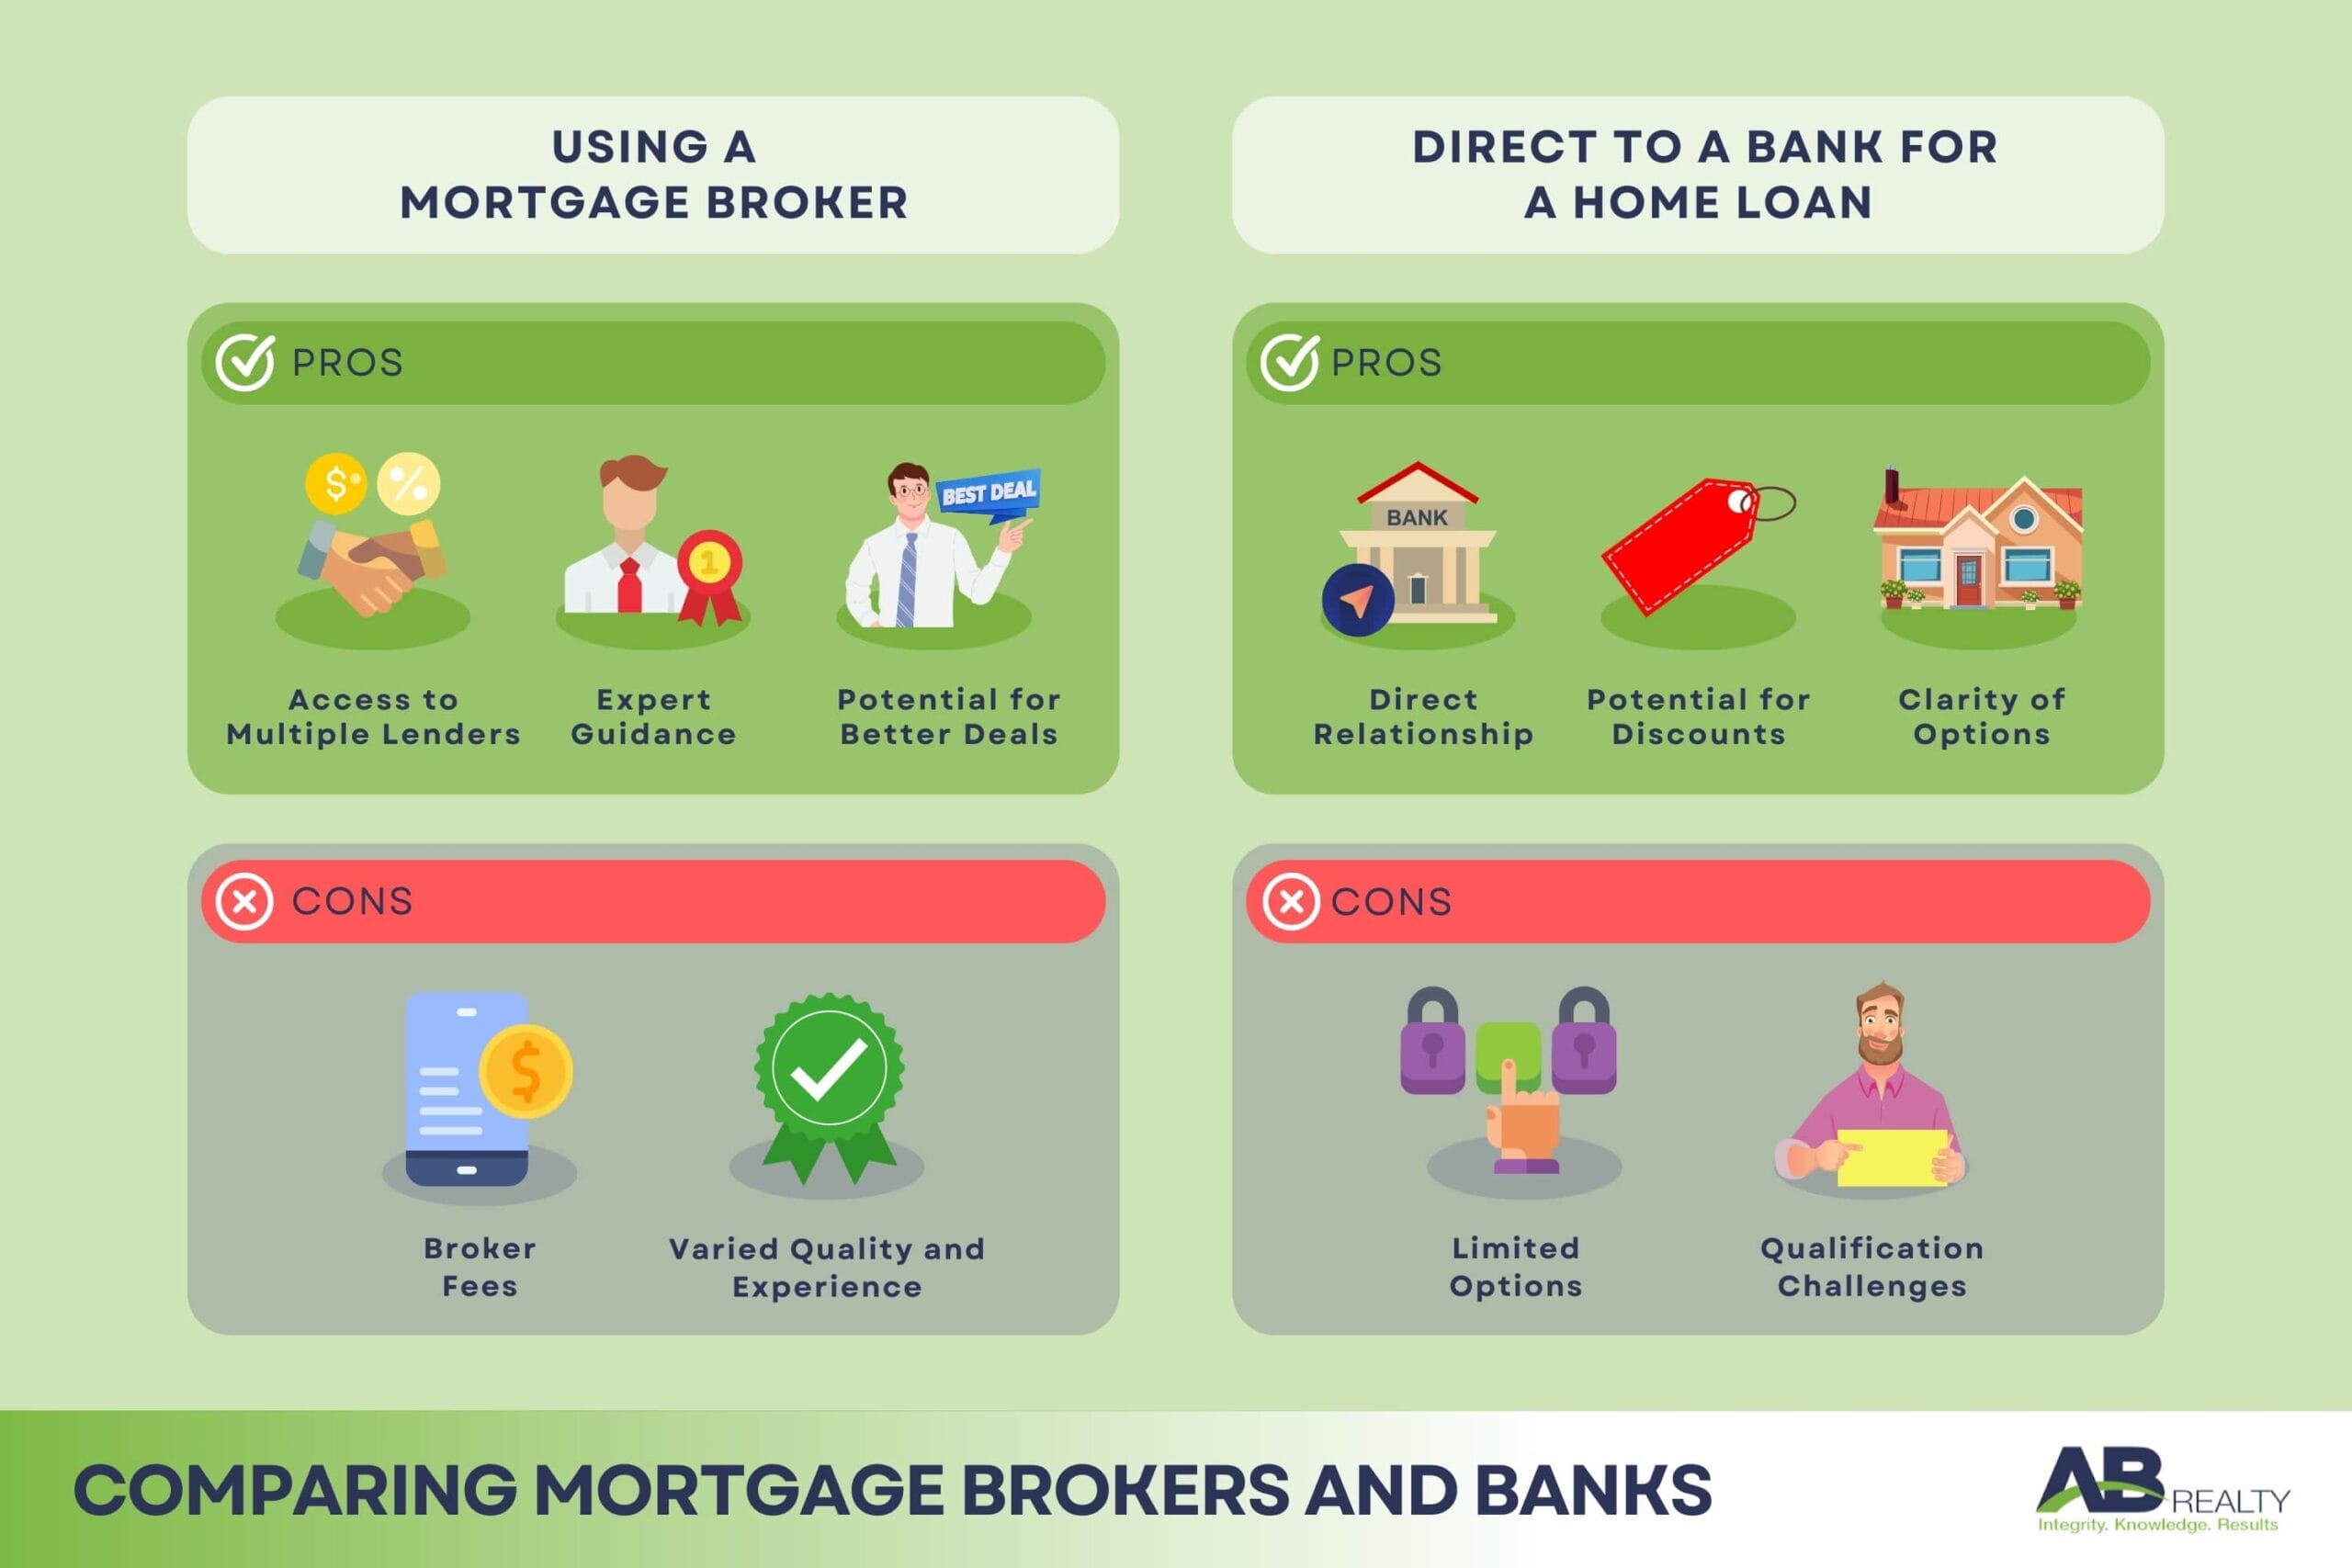 Comparing Mortgage Brokers and Banks